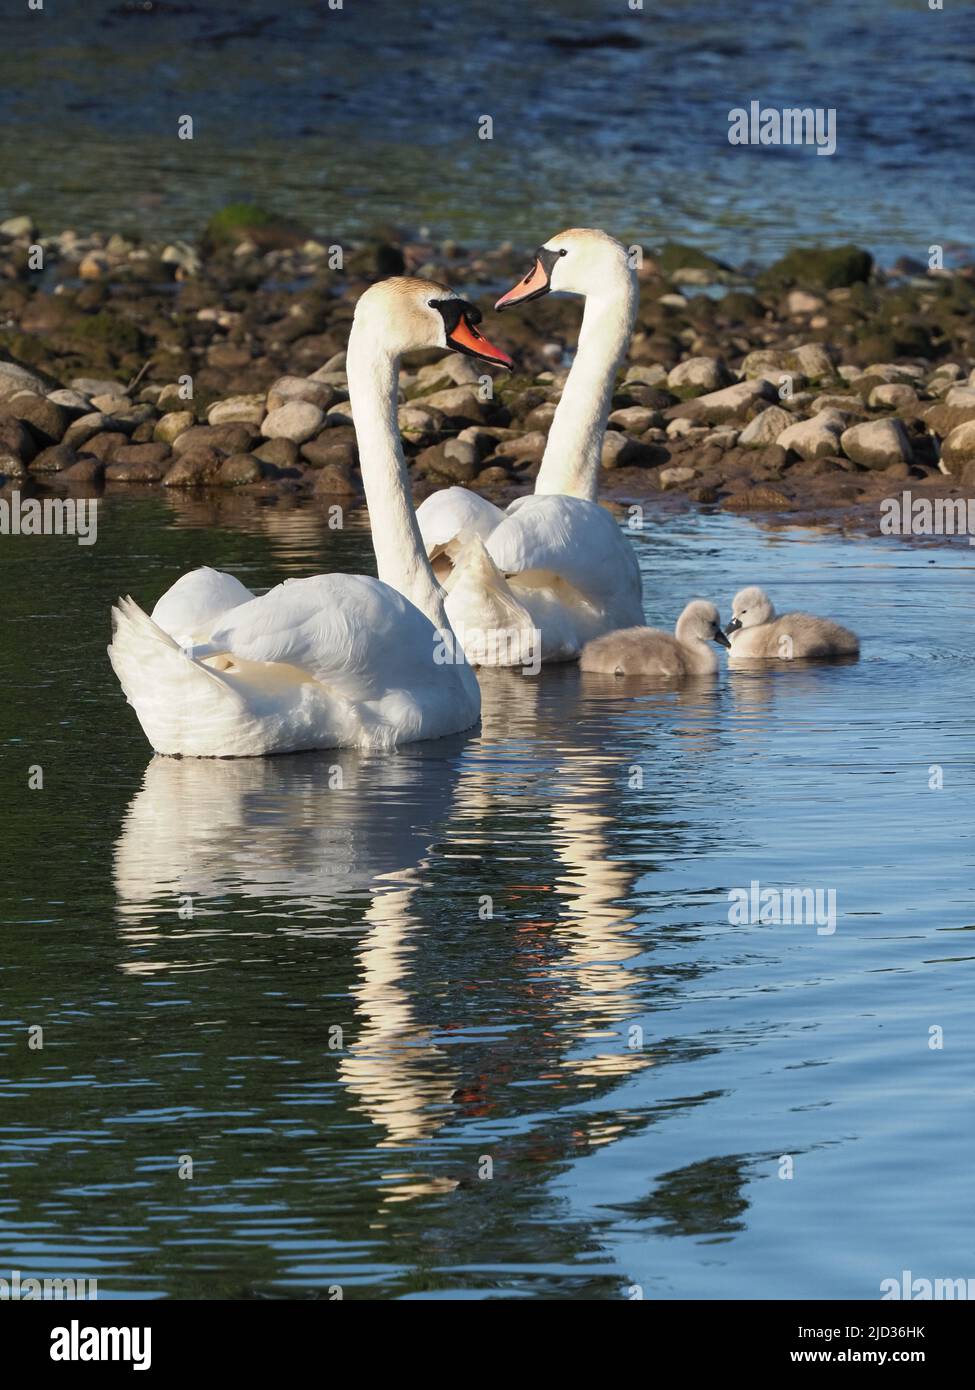 Two Cygnus olor Cygnets, only one week old close parent Swans. Their grey fluffy down, contrasting against the white feathers of the adults Stock Photo